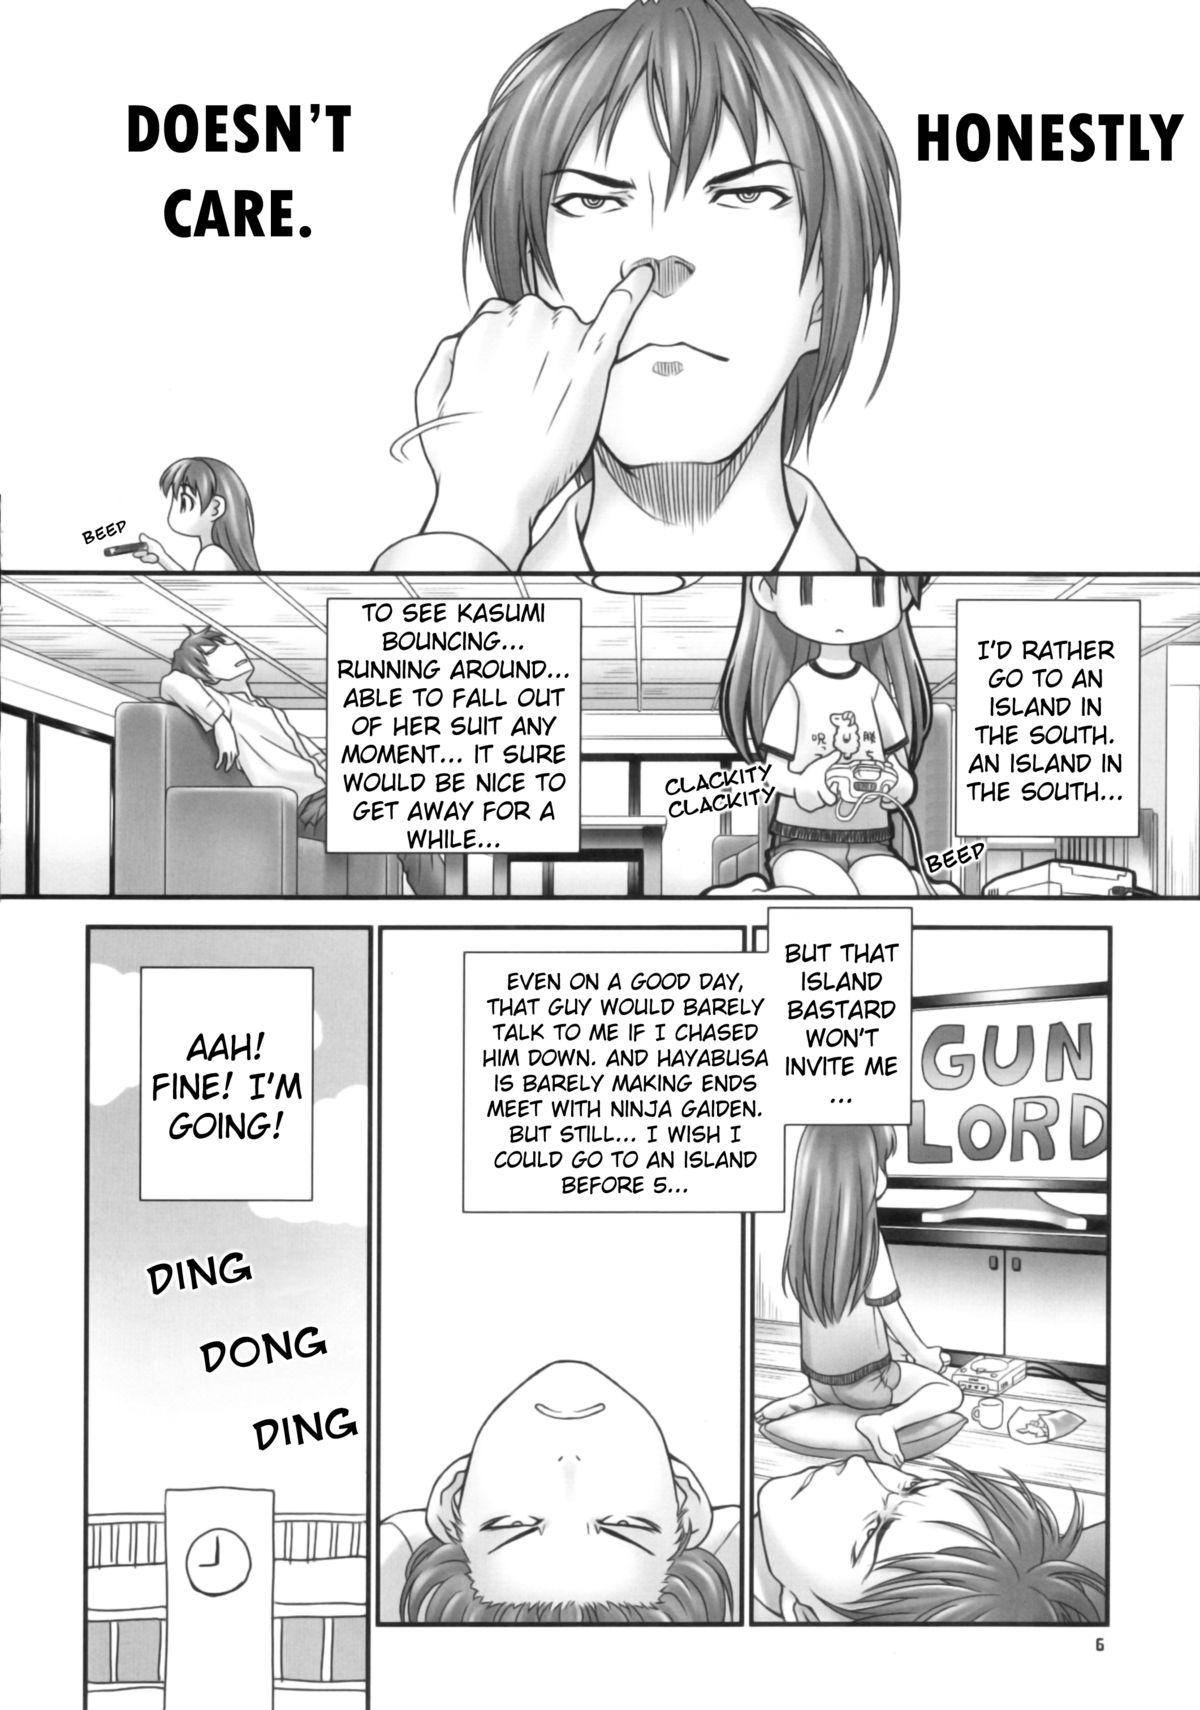 Interview St. Dead or Alive Highschool - Love Love Kasumi Chan Teacher - Dead or alive Asslicking - Page 5